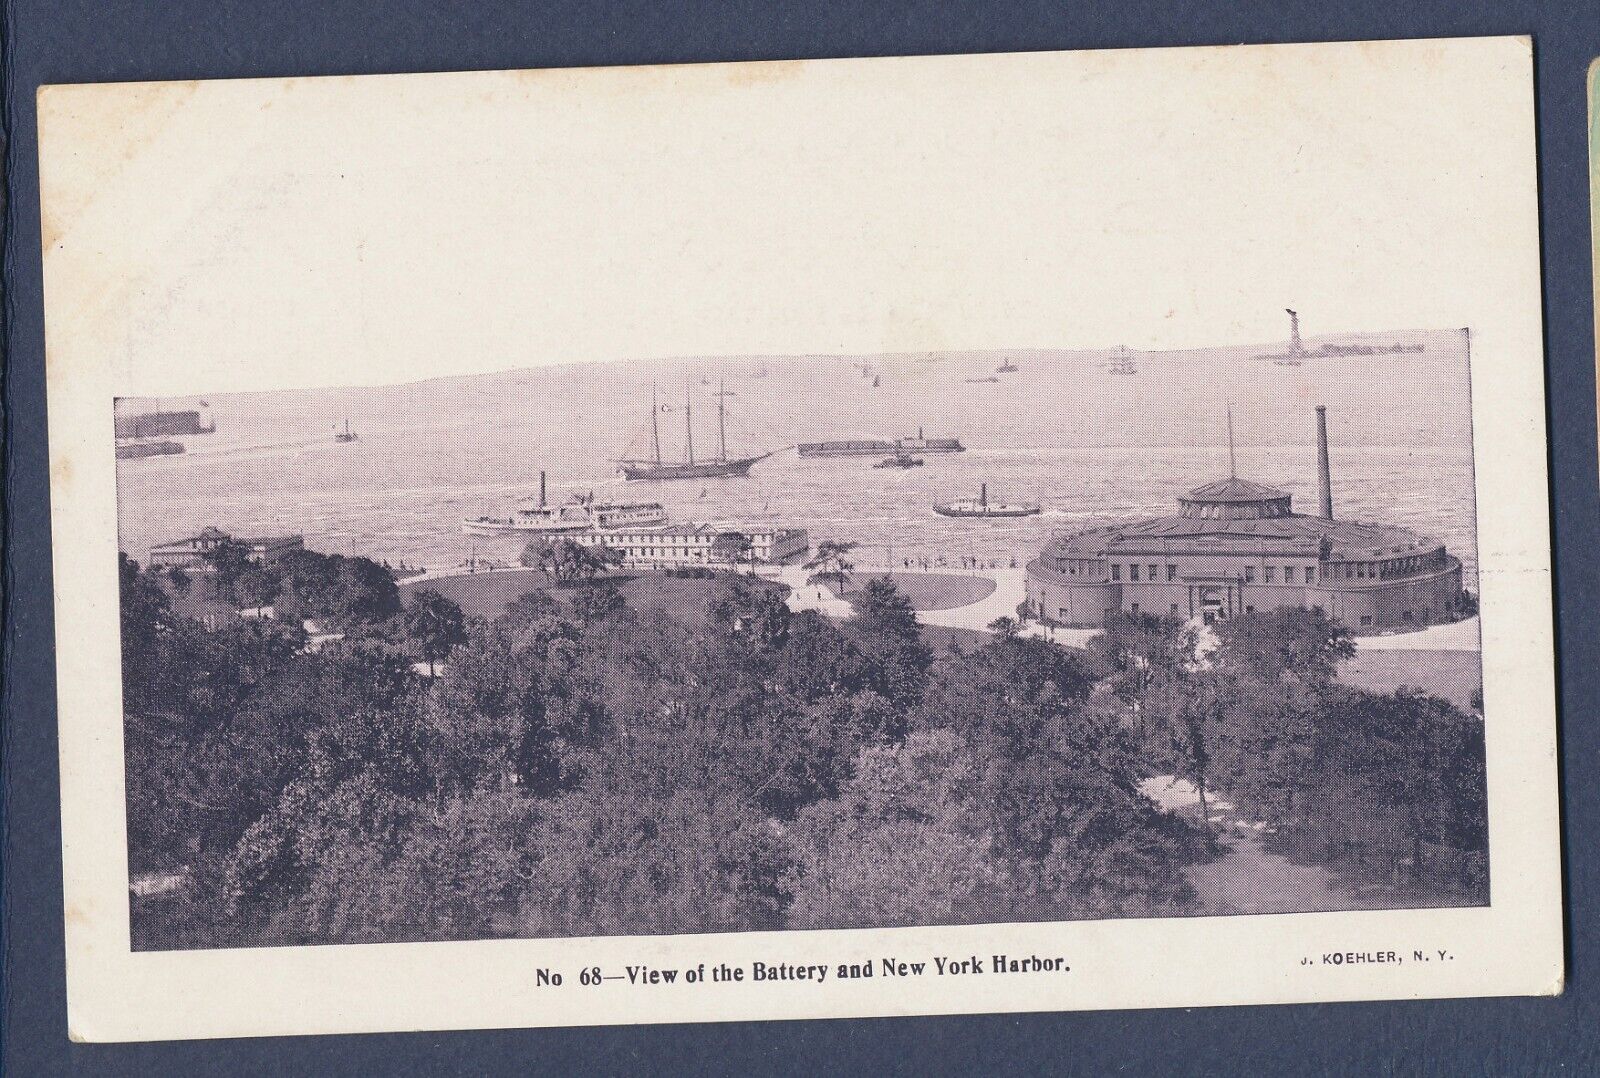 View of the Battery and New York Harbor - steamer & ships - unmailed post card